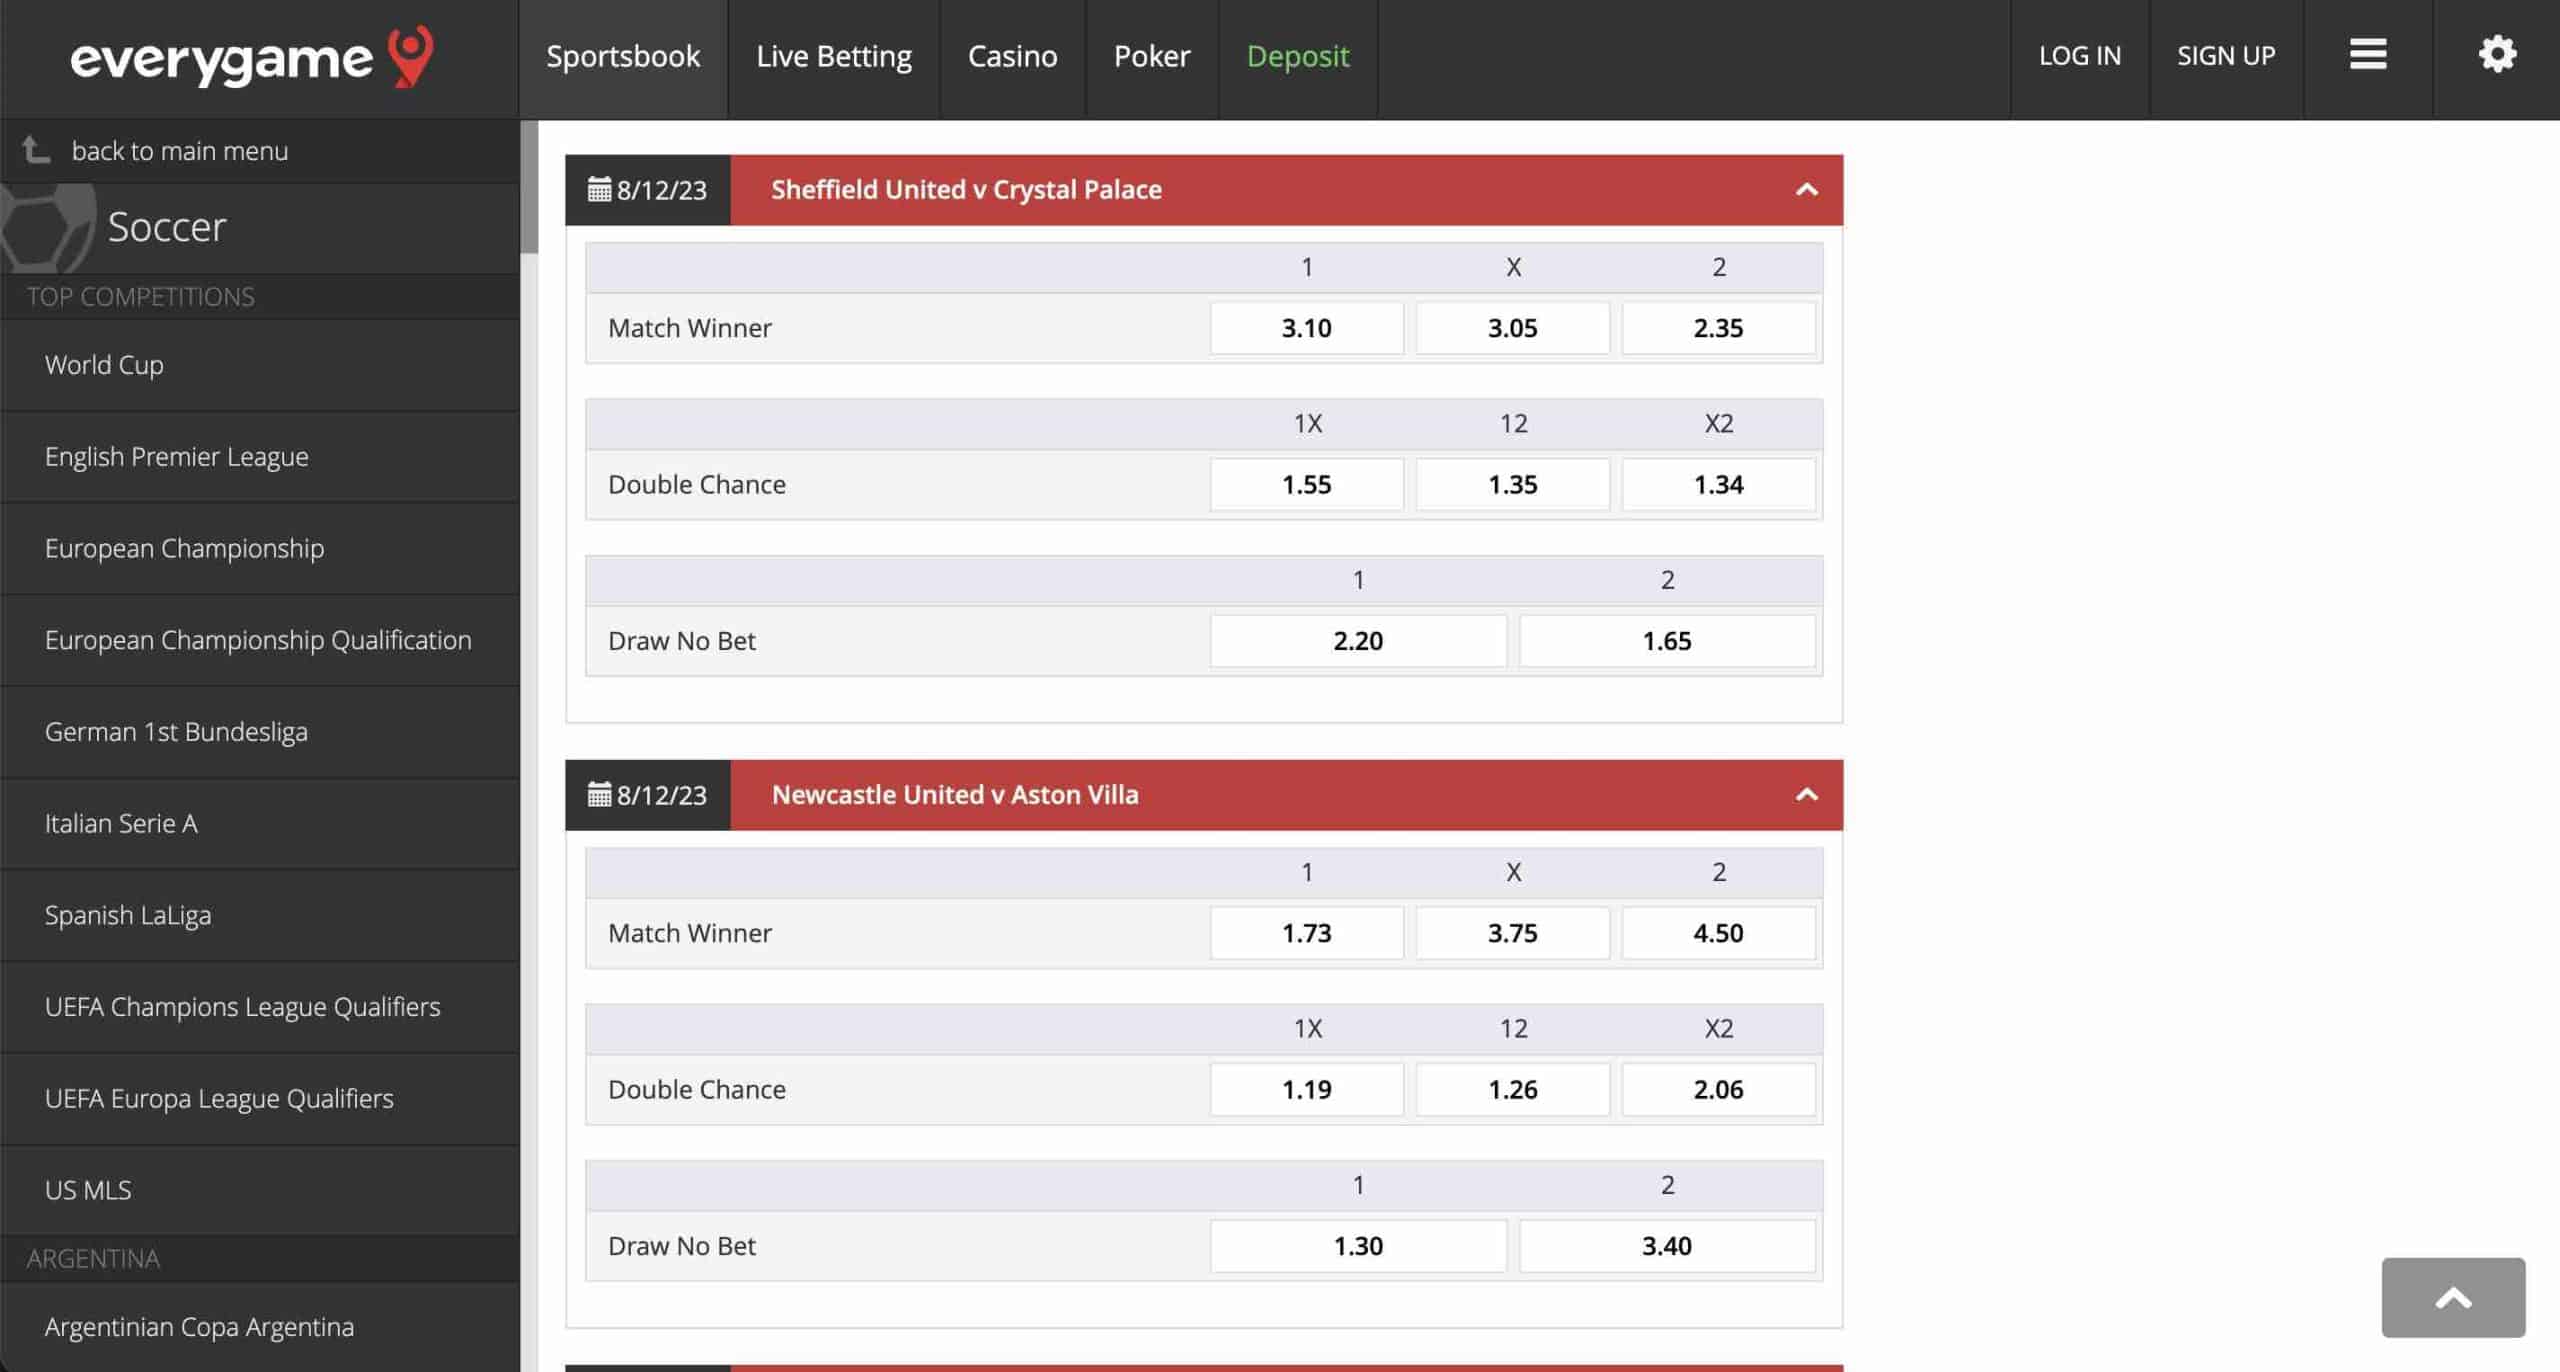 A screenshot of the odds for Premier League games at BetOnline with Sheffield United vs Crystal Palace shown